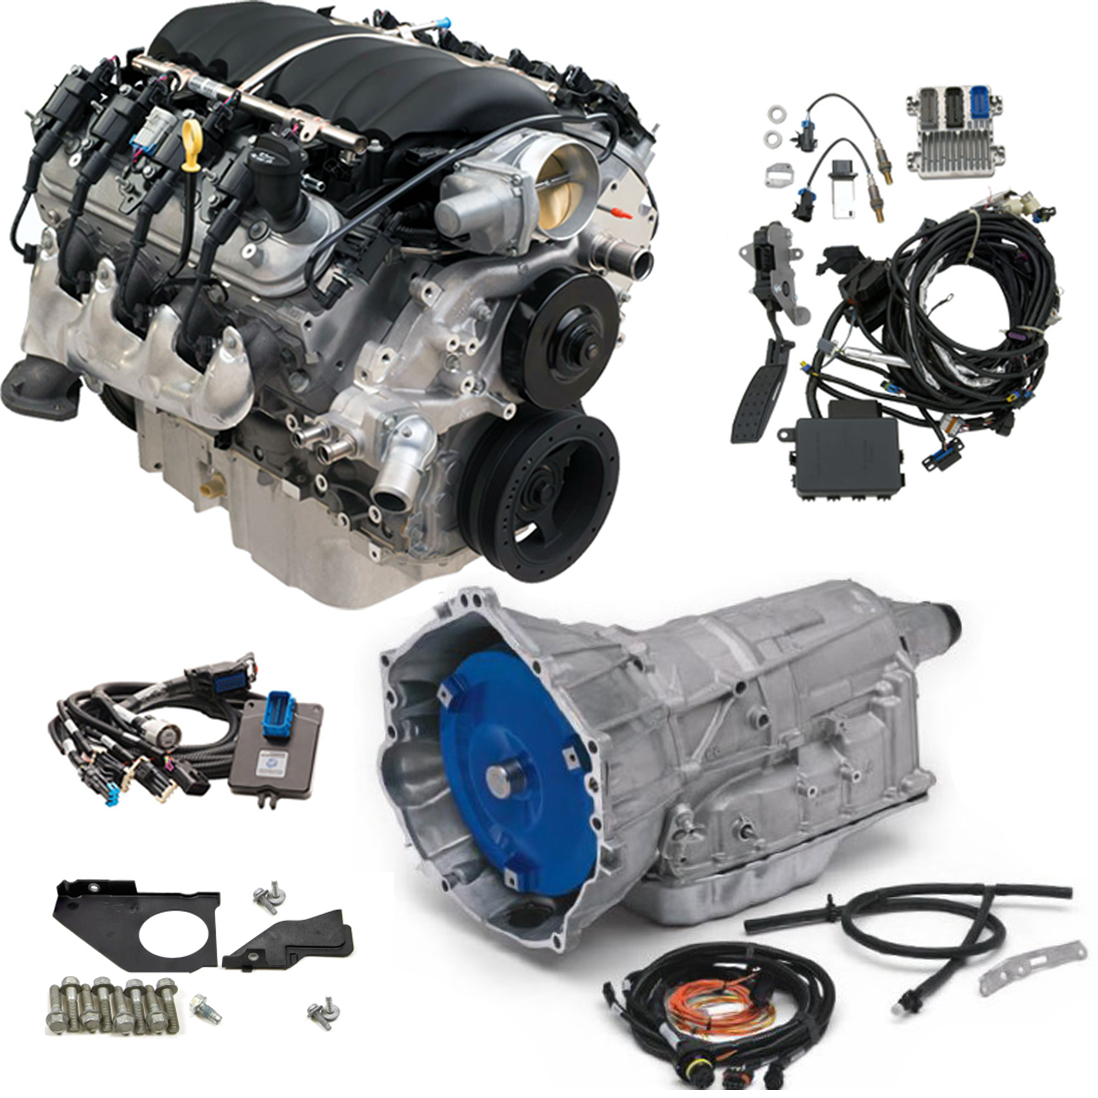 LS376/525 6.2L Connect & Cruise Powertrain System with Supermatic 6L80-E Automatic Transmission